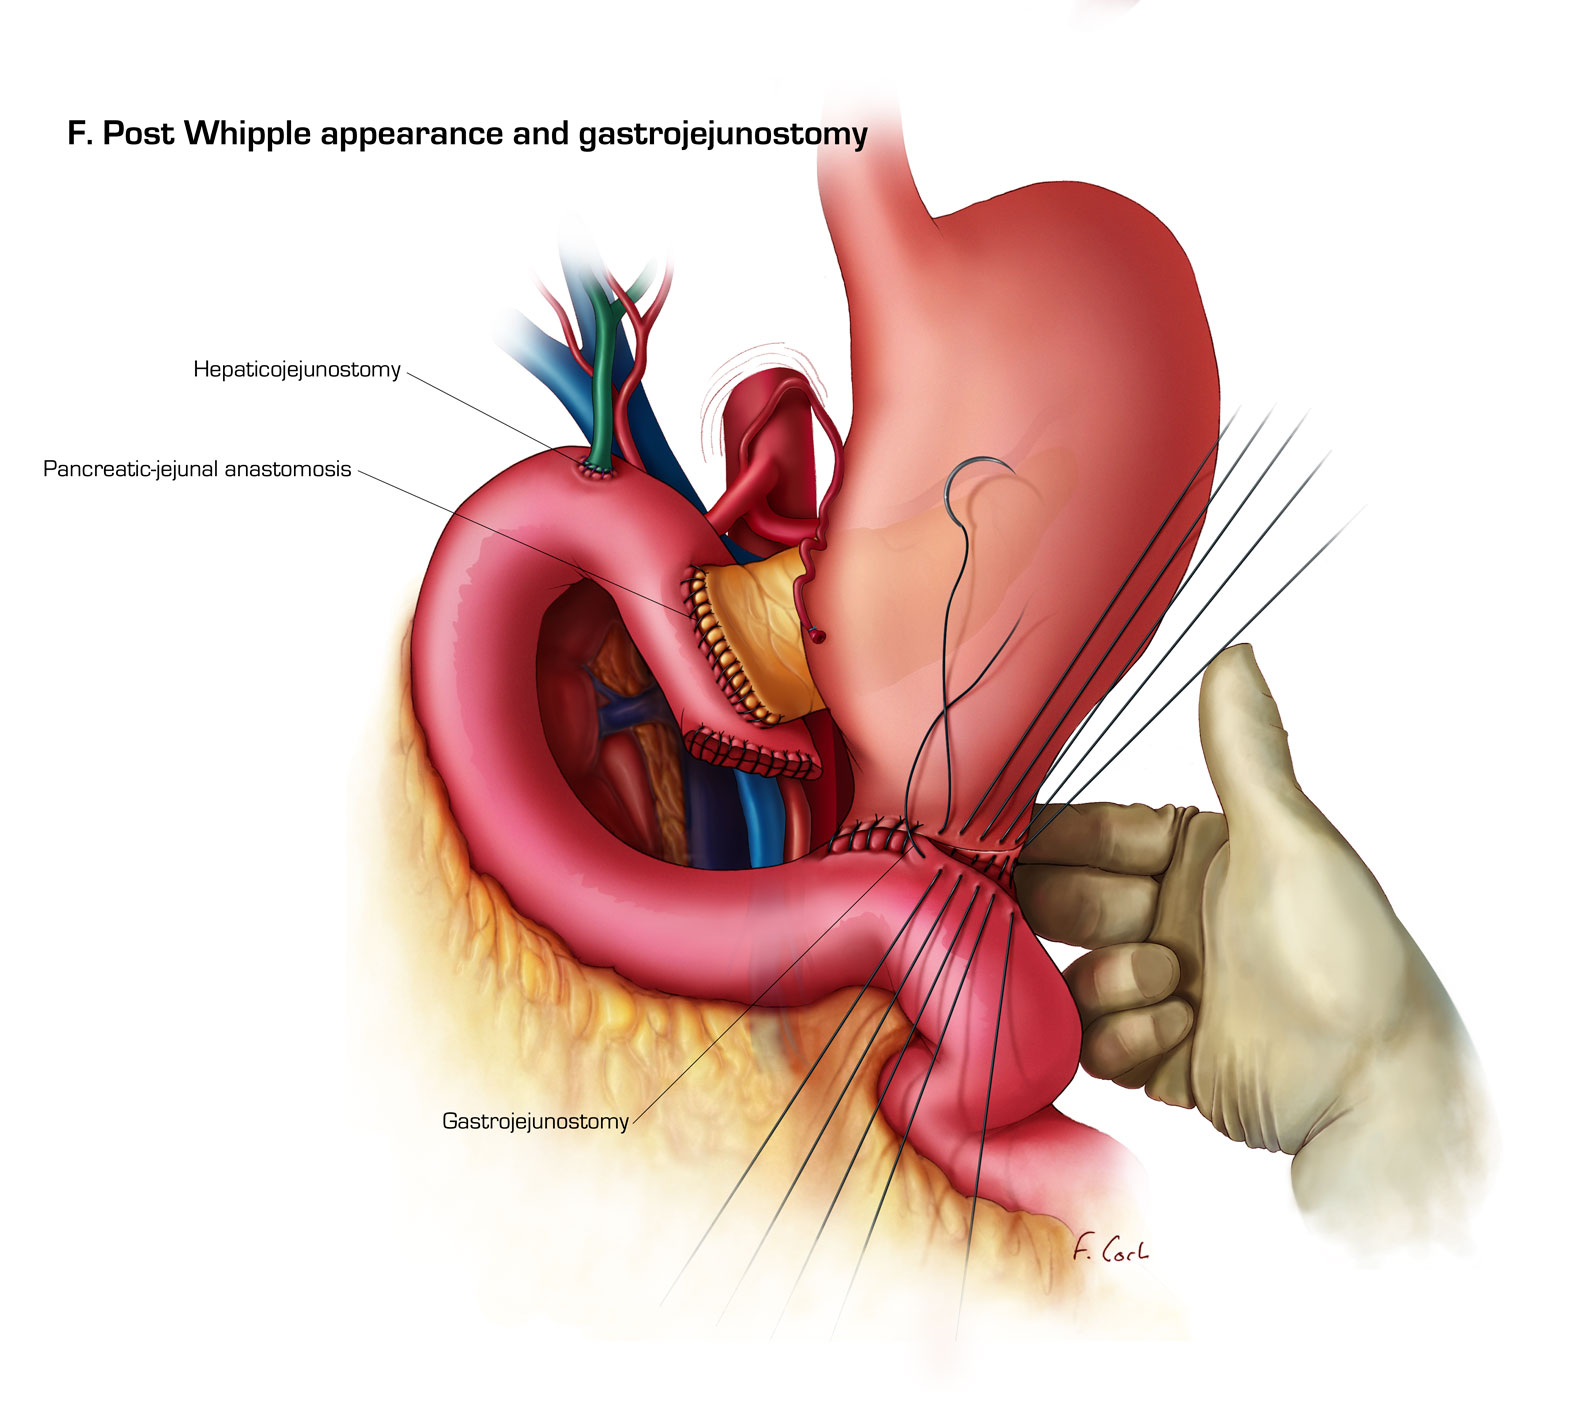 Post Whipple appearance and gastrojejunostomy